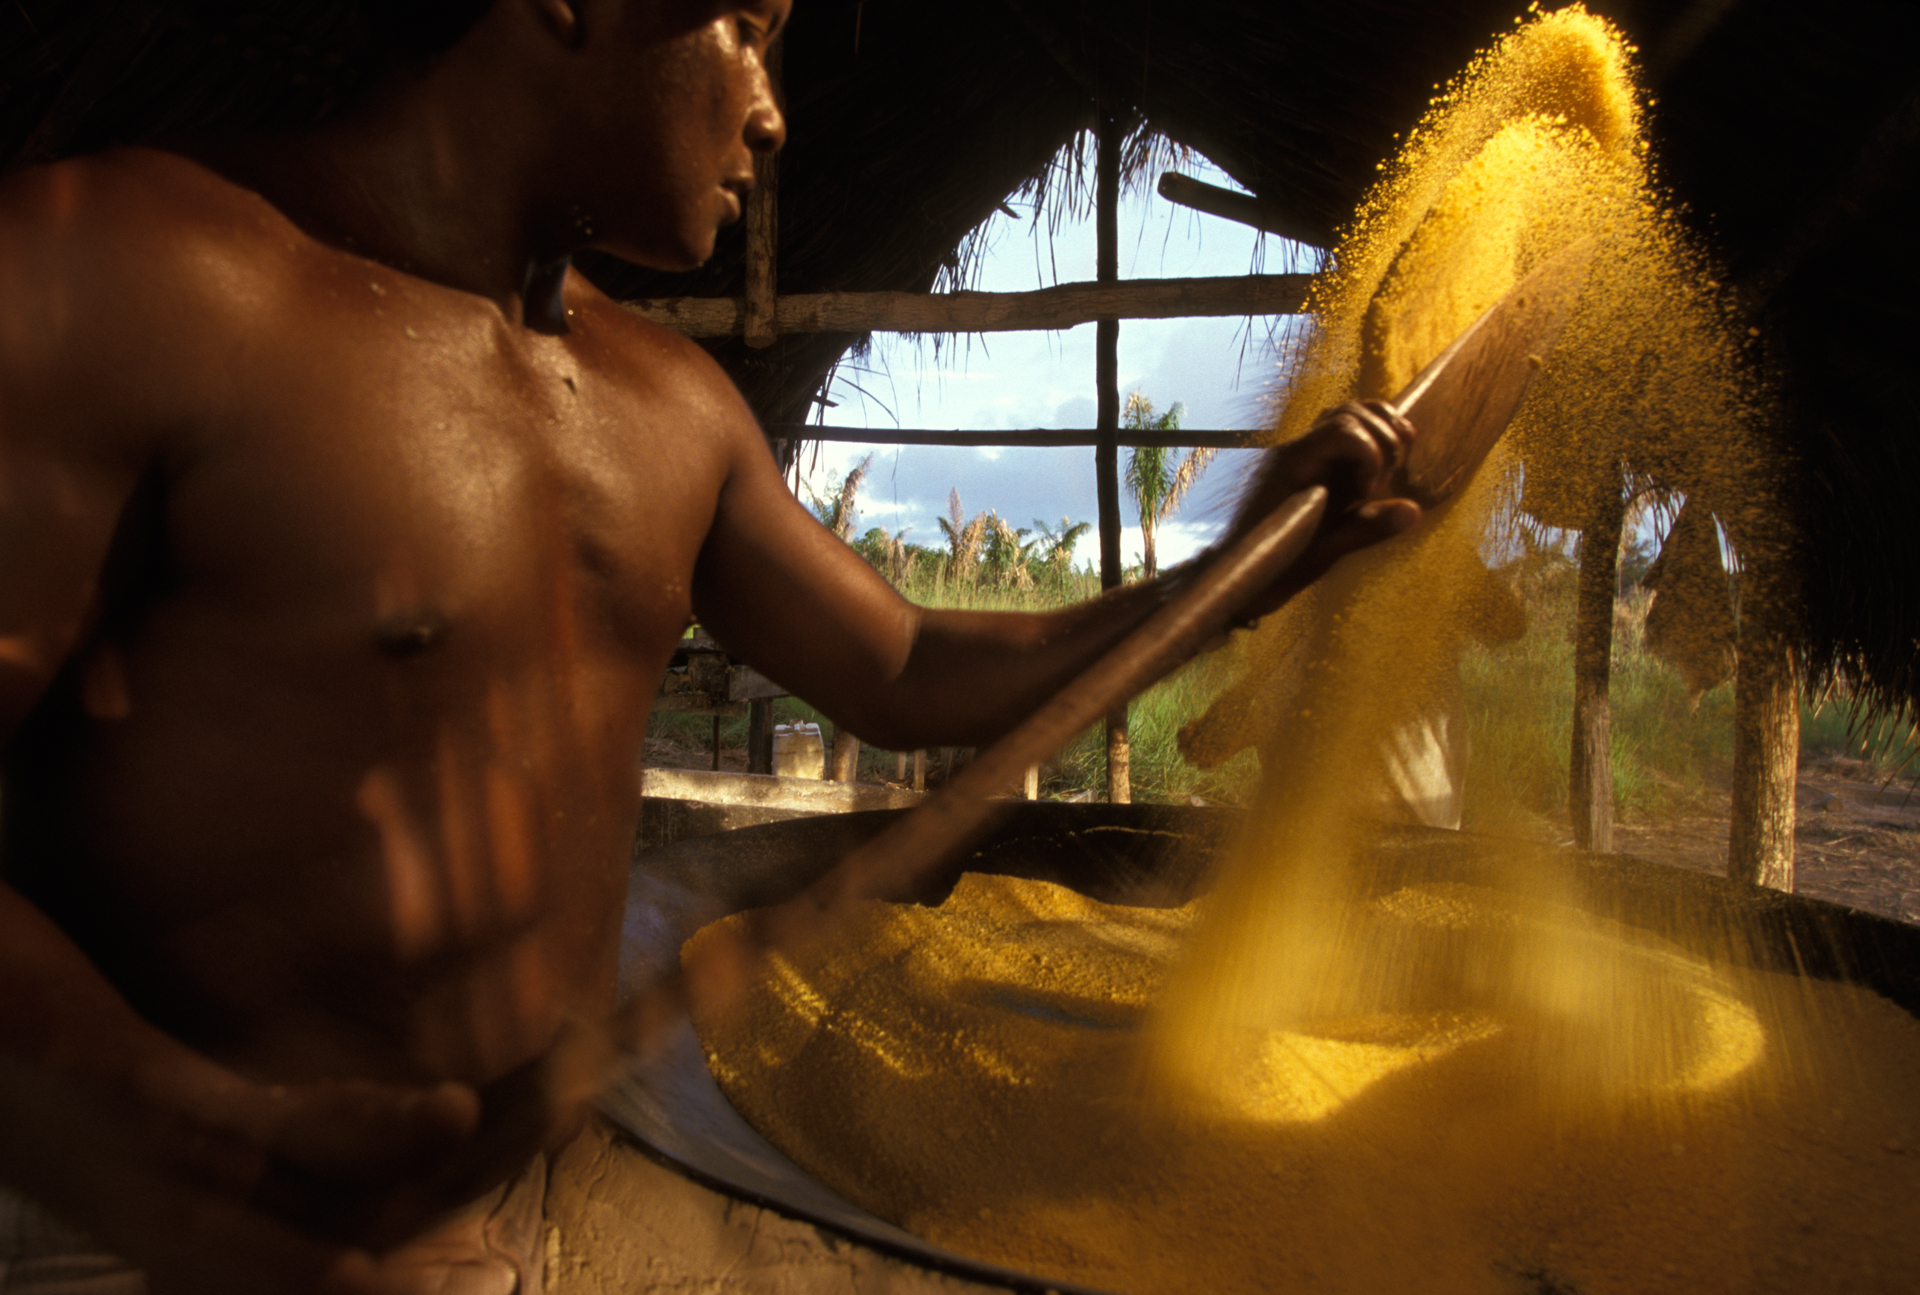  Using a wooden spatula, a Waiapixana worker dries the locally-grown cassava grain (maniok) over a large, heated pan. The cassava will later be sold at a nearby market.  Moskow, Brazil  